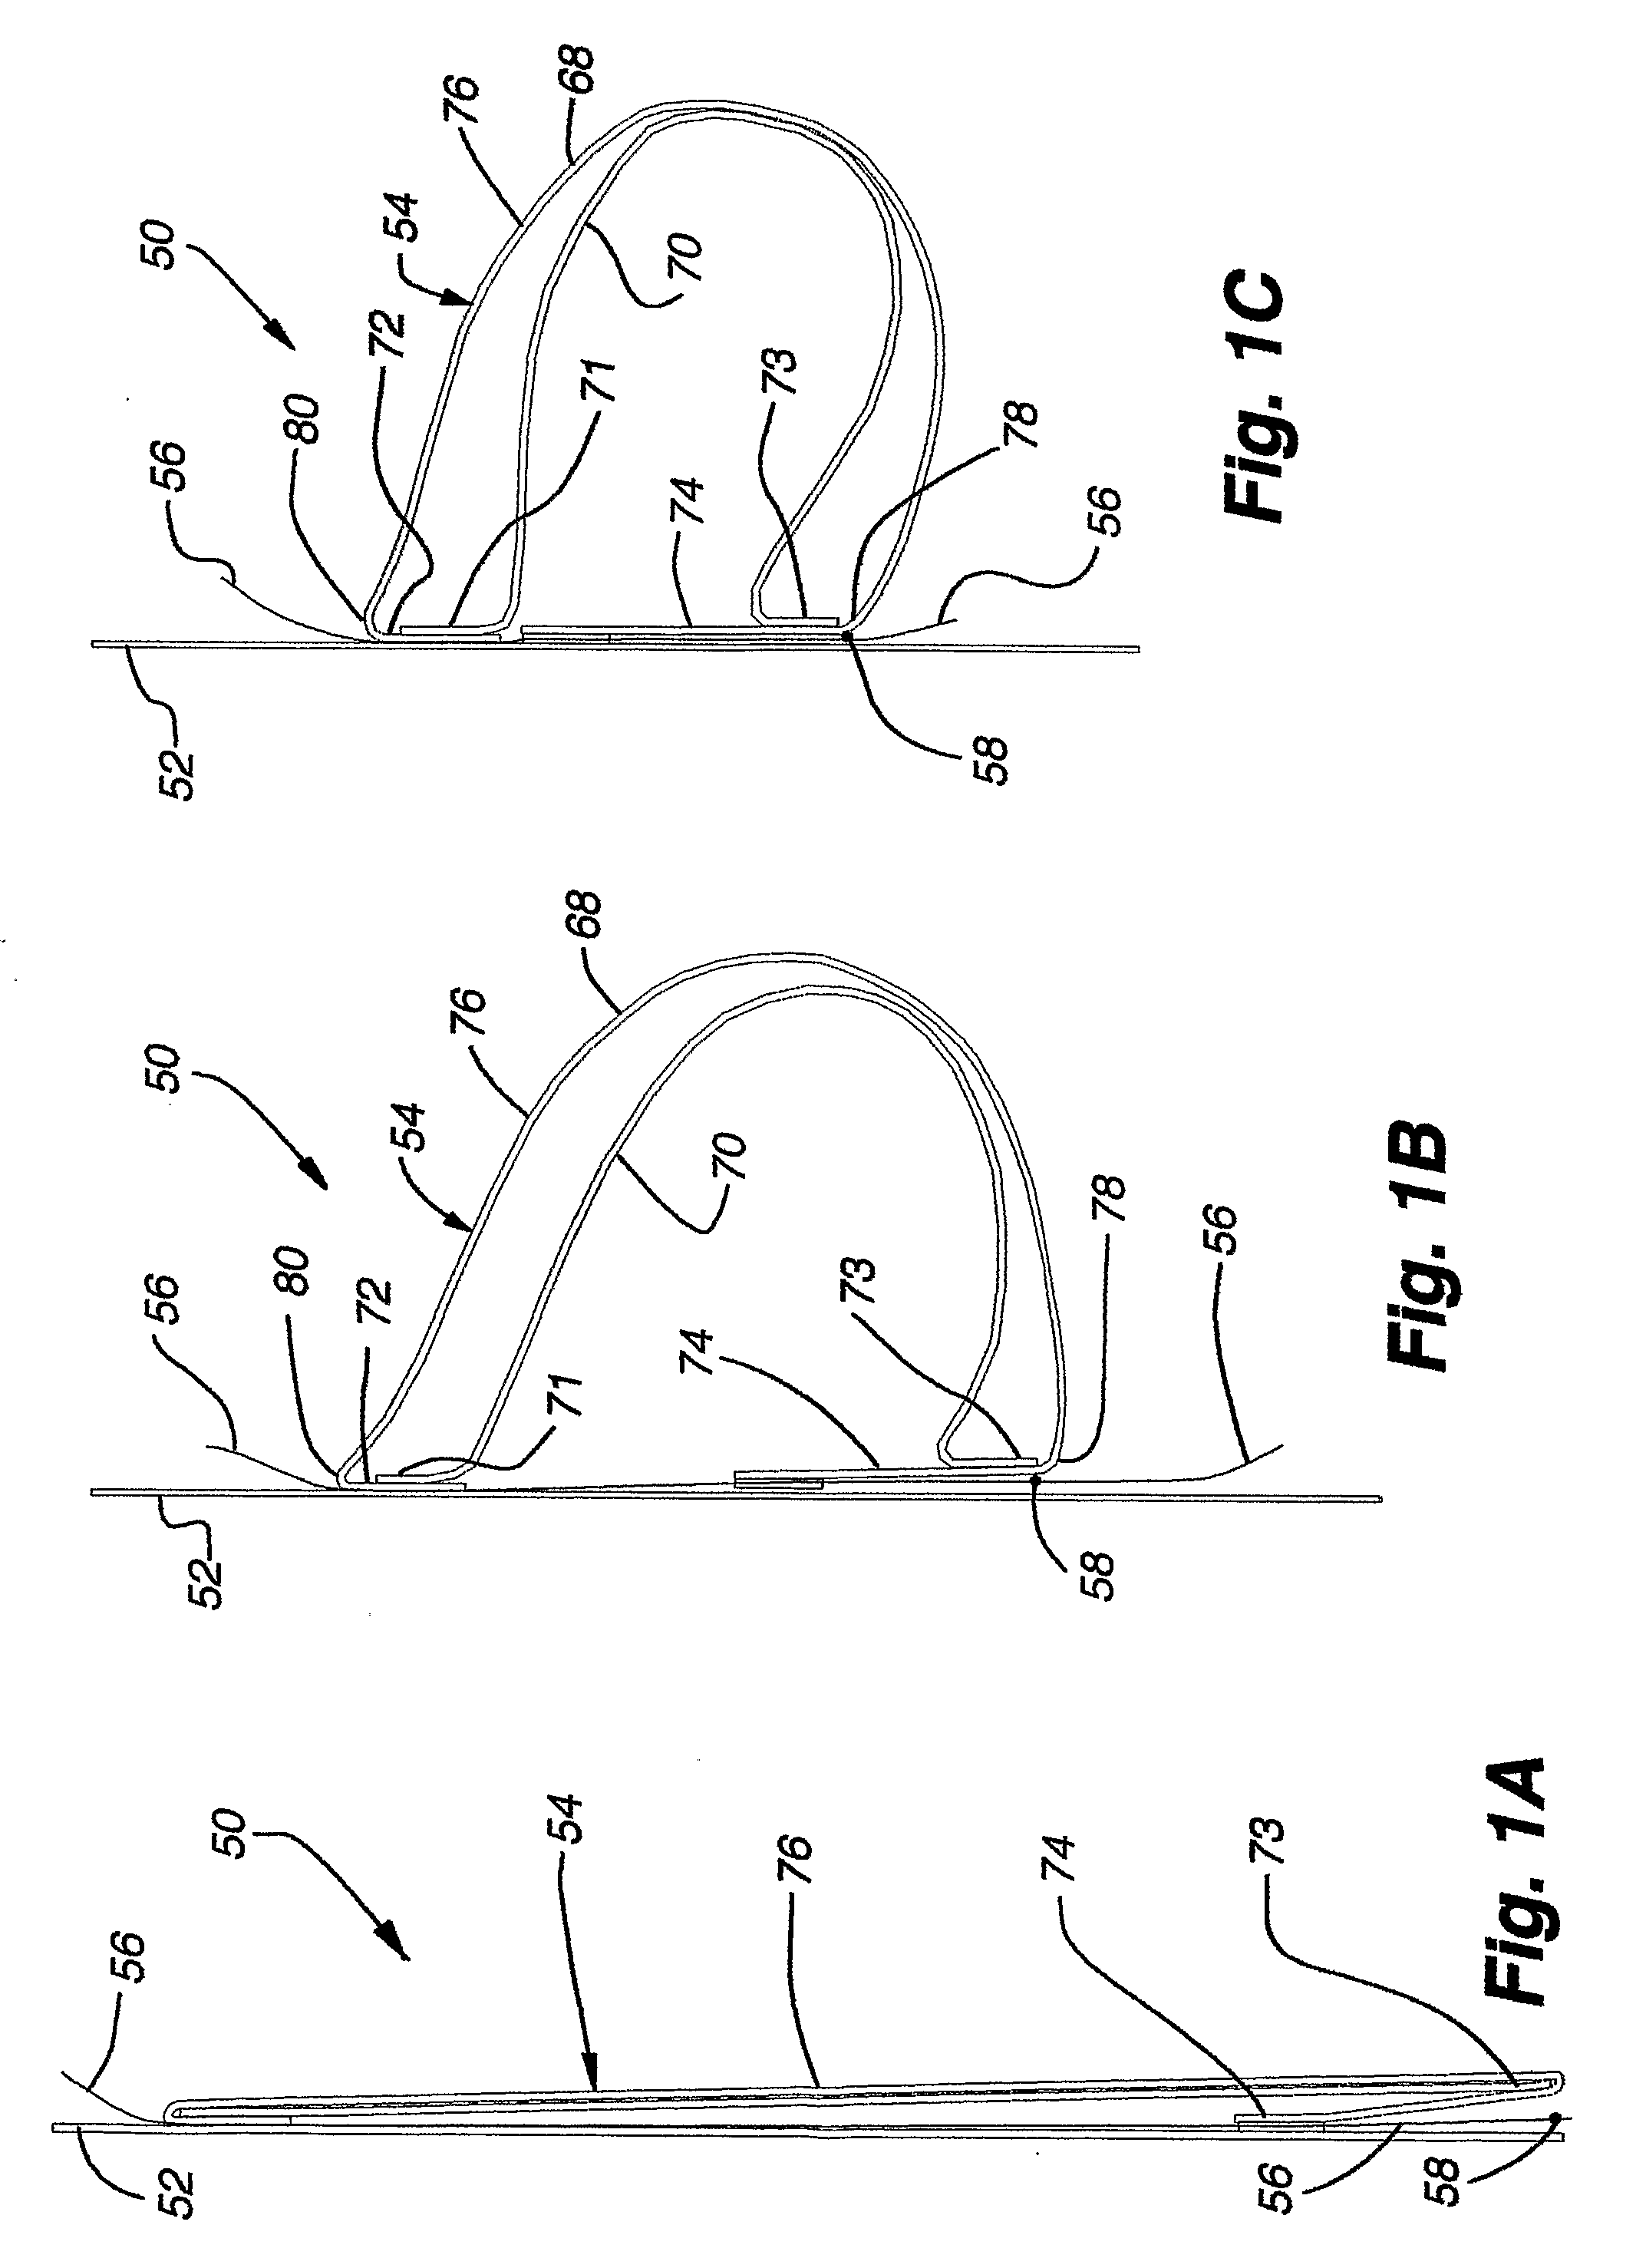 Appparatus and Method for Making a Window Covering Having Operable Vanes